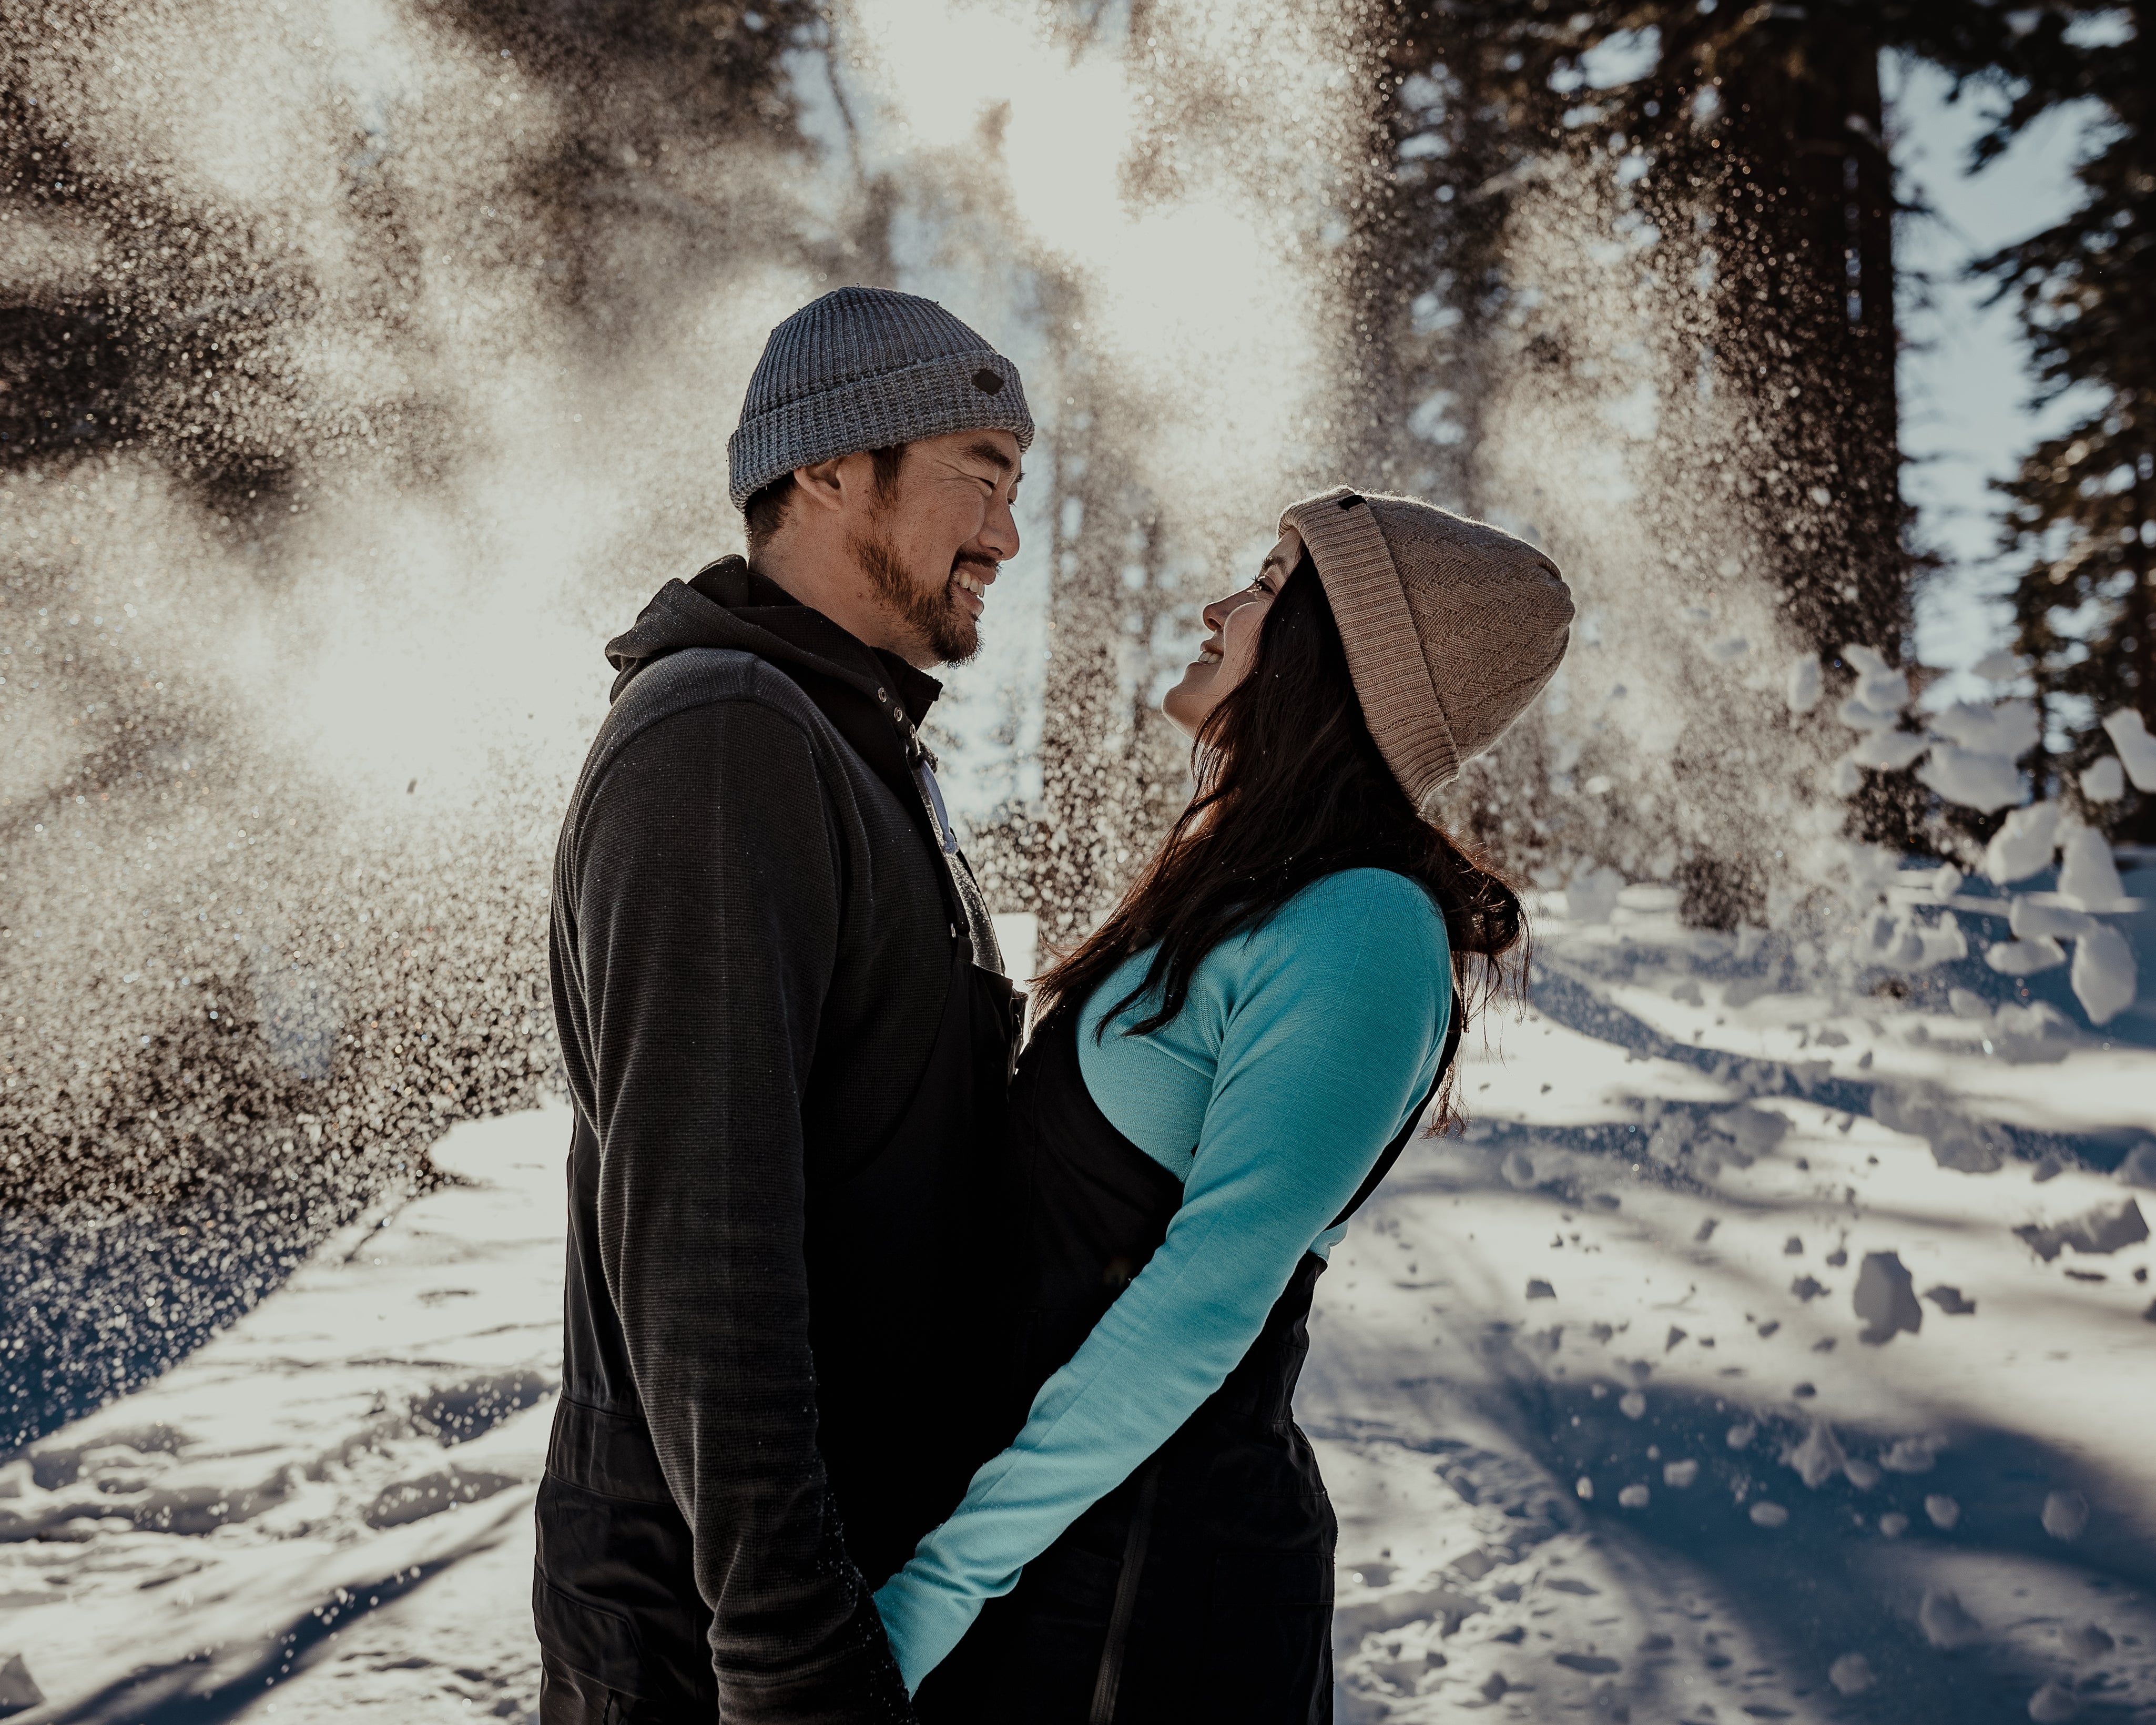 a couple wearing Ridge Merino winter layers smiles at each other while sun pours through the snowy trees in the background